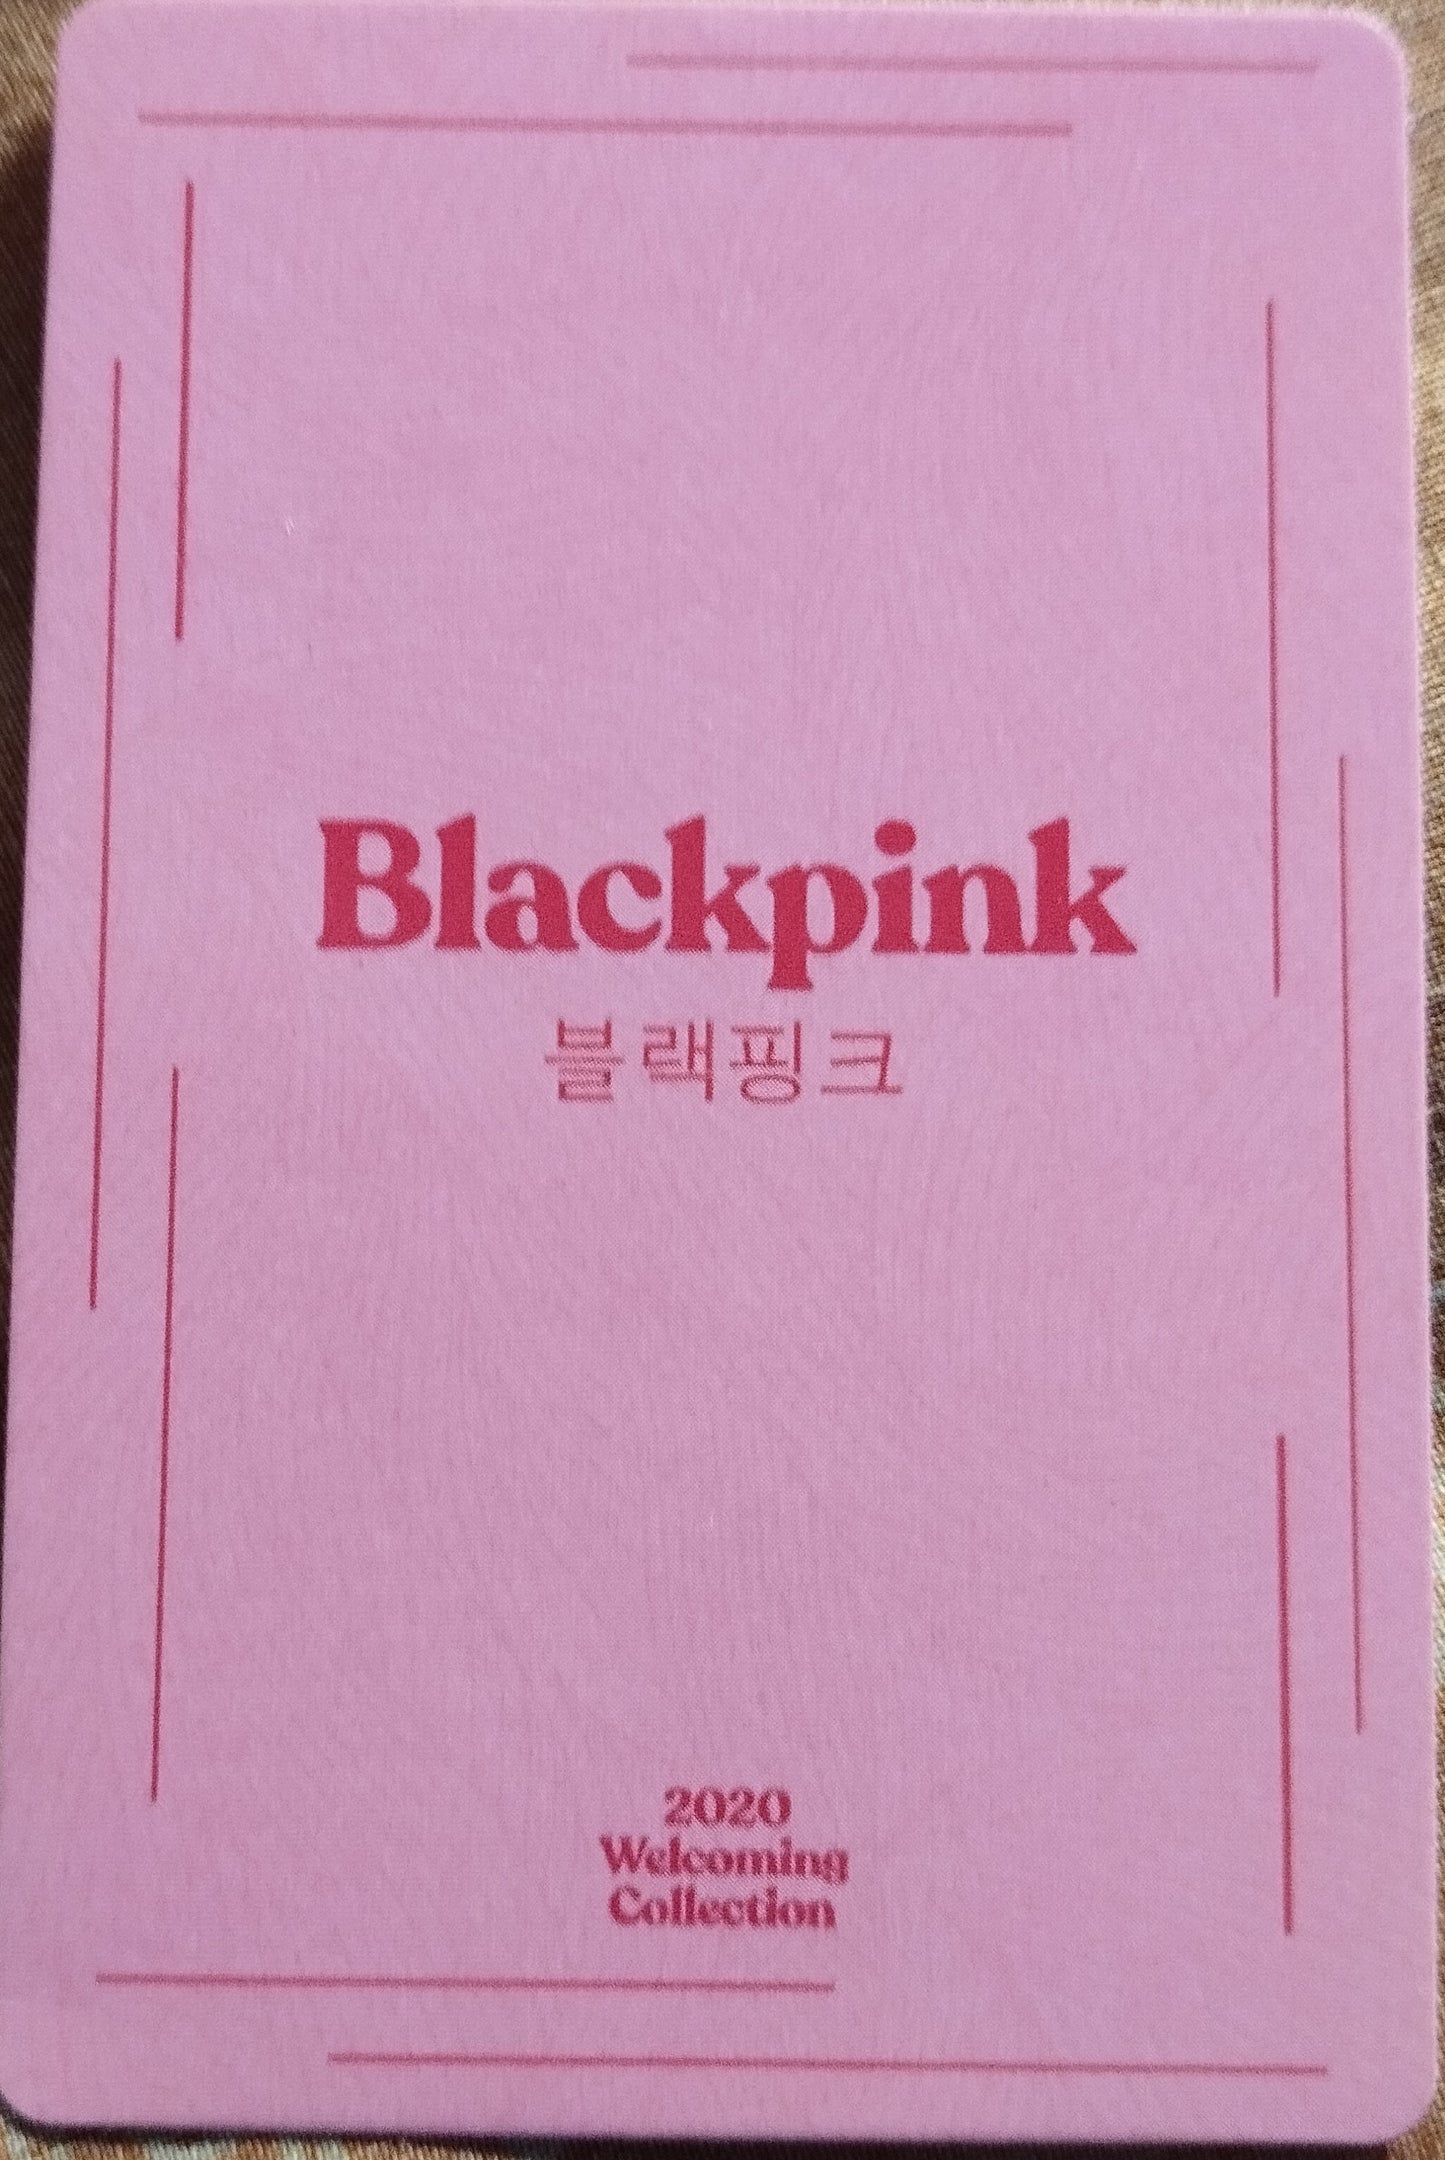 Photocard  BLACKPINK  2020 welcoming collection  Rose  Lisa